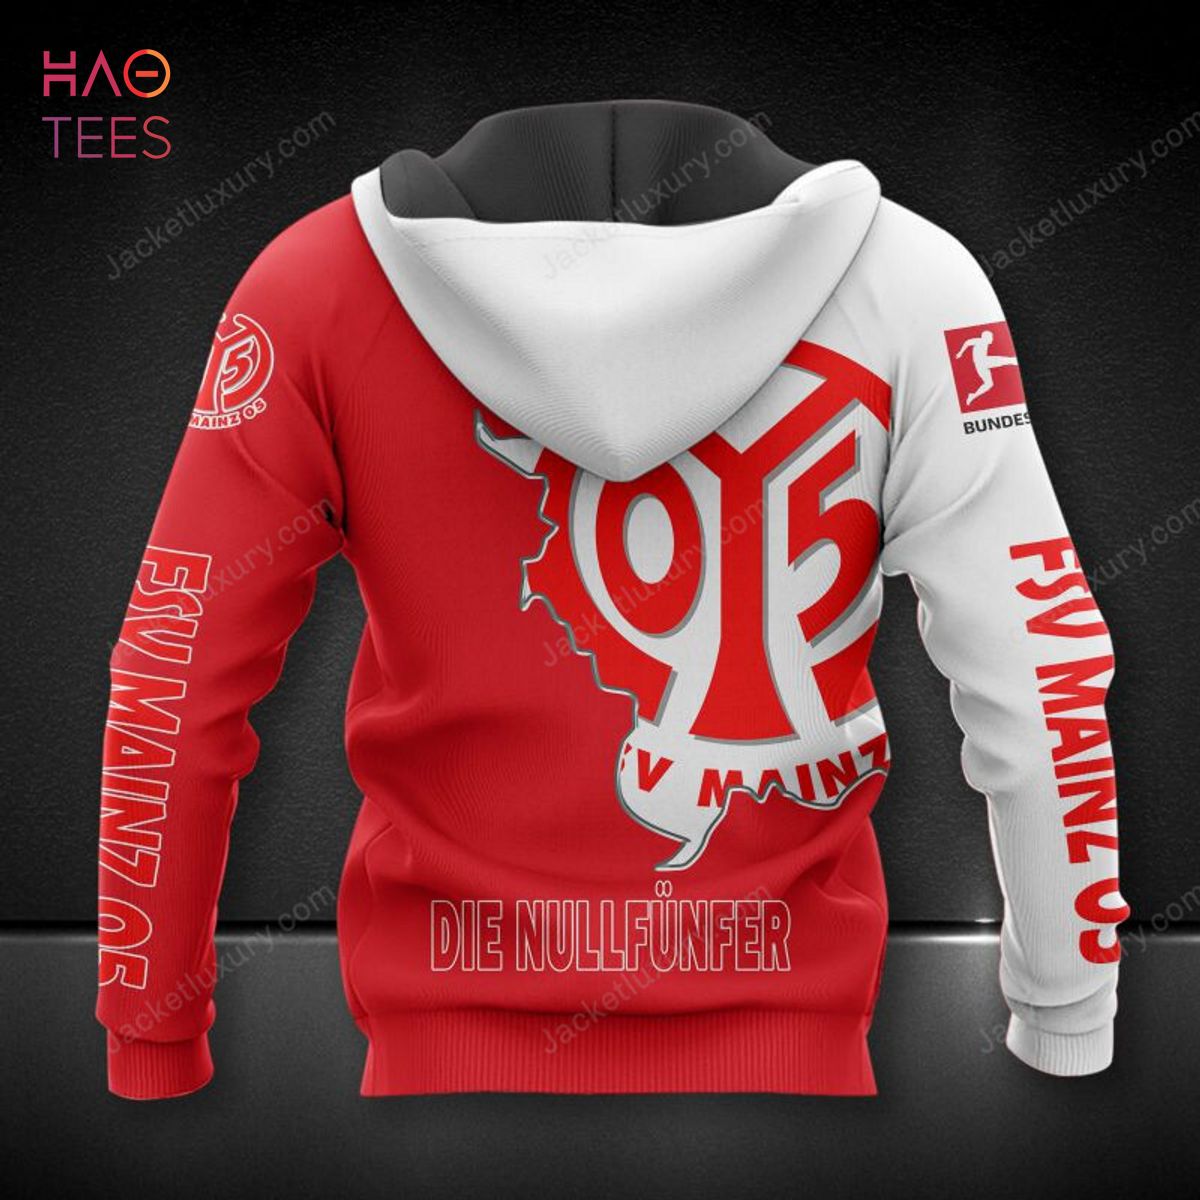 HOT FSV Mainz White Red 3D Hoodie Limited Edition